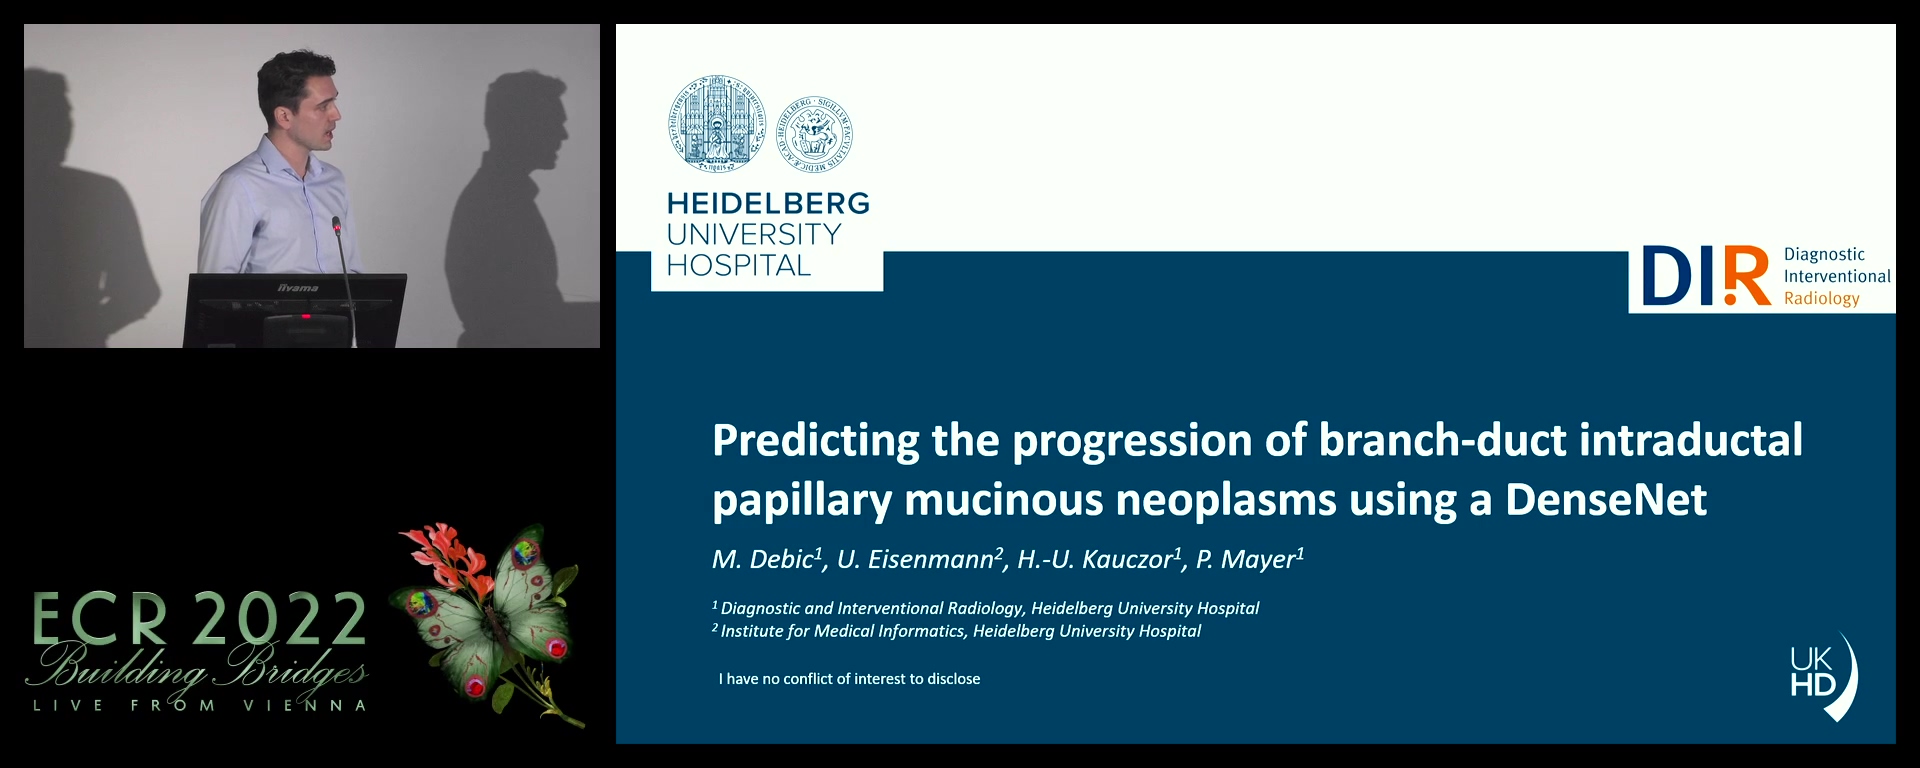 Predicting the progression of branch-duct intraductal papillary mucinous neoplasms using a DenseNet